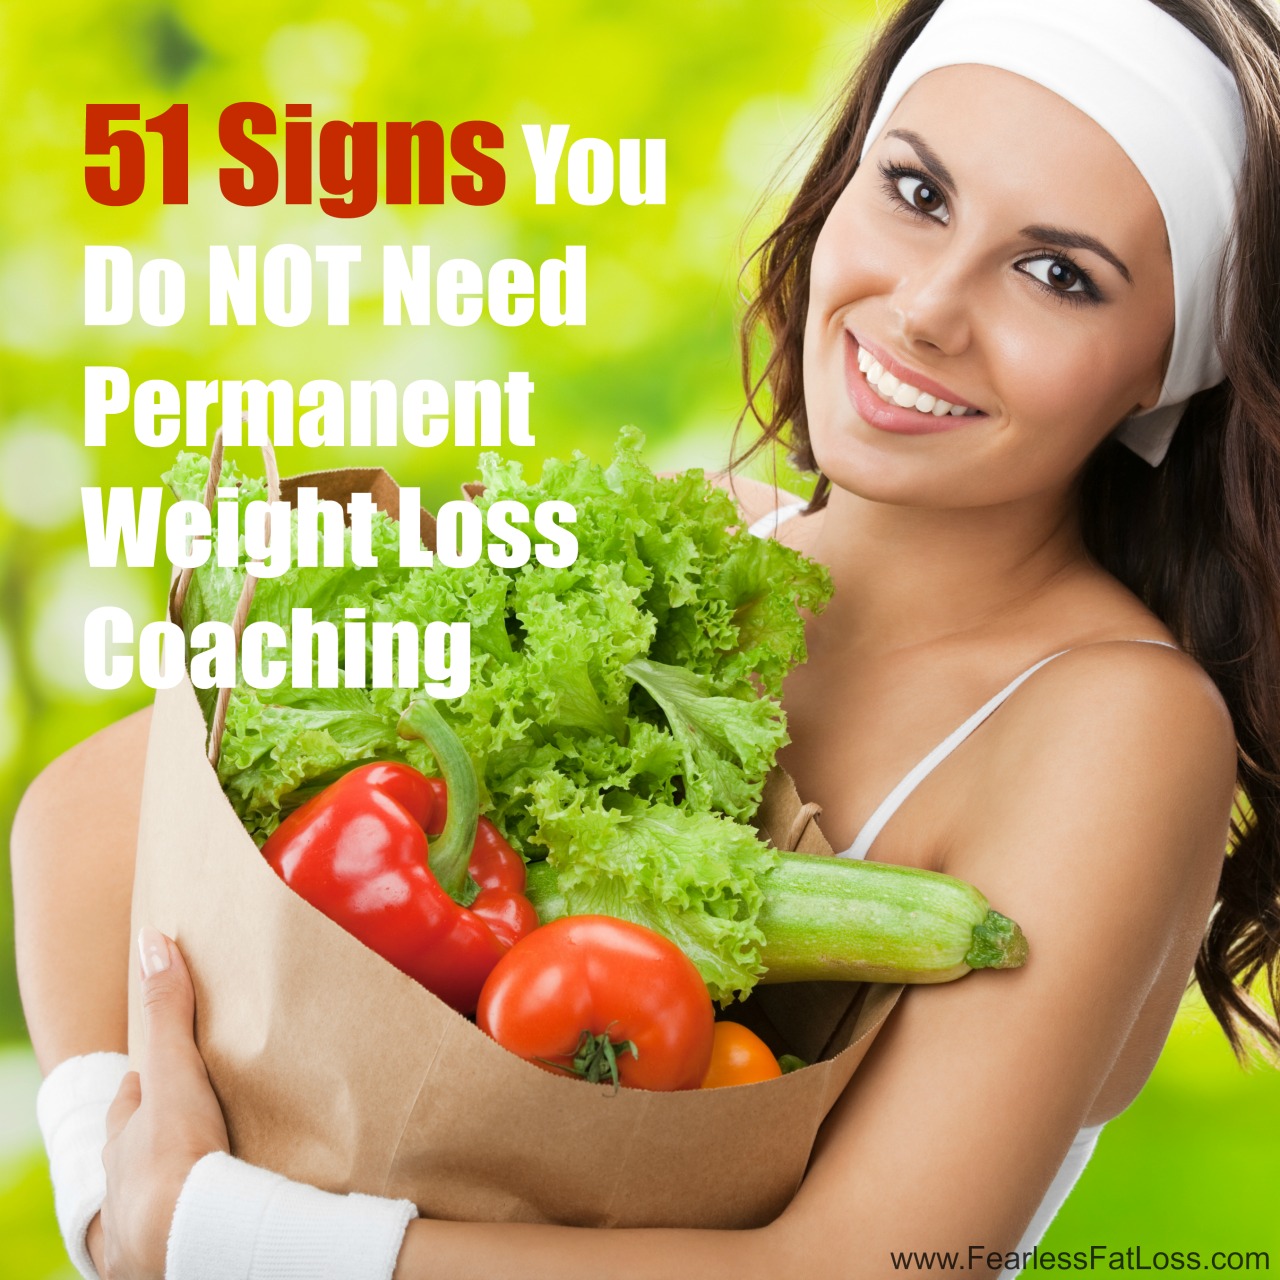 51 Signs You Don't Need Permanent Weight Loss Coaching | FearlessFatLoss.com | Permanent Weight Loss Coach JoLynn Braley